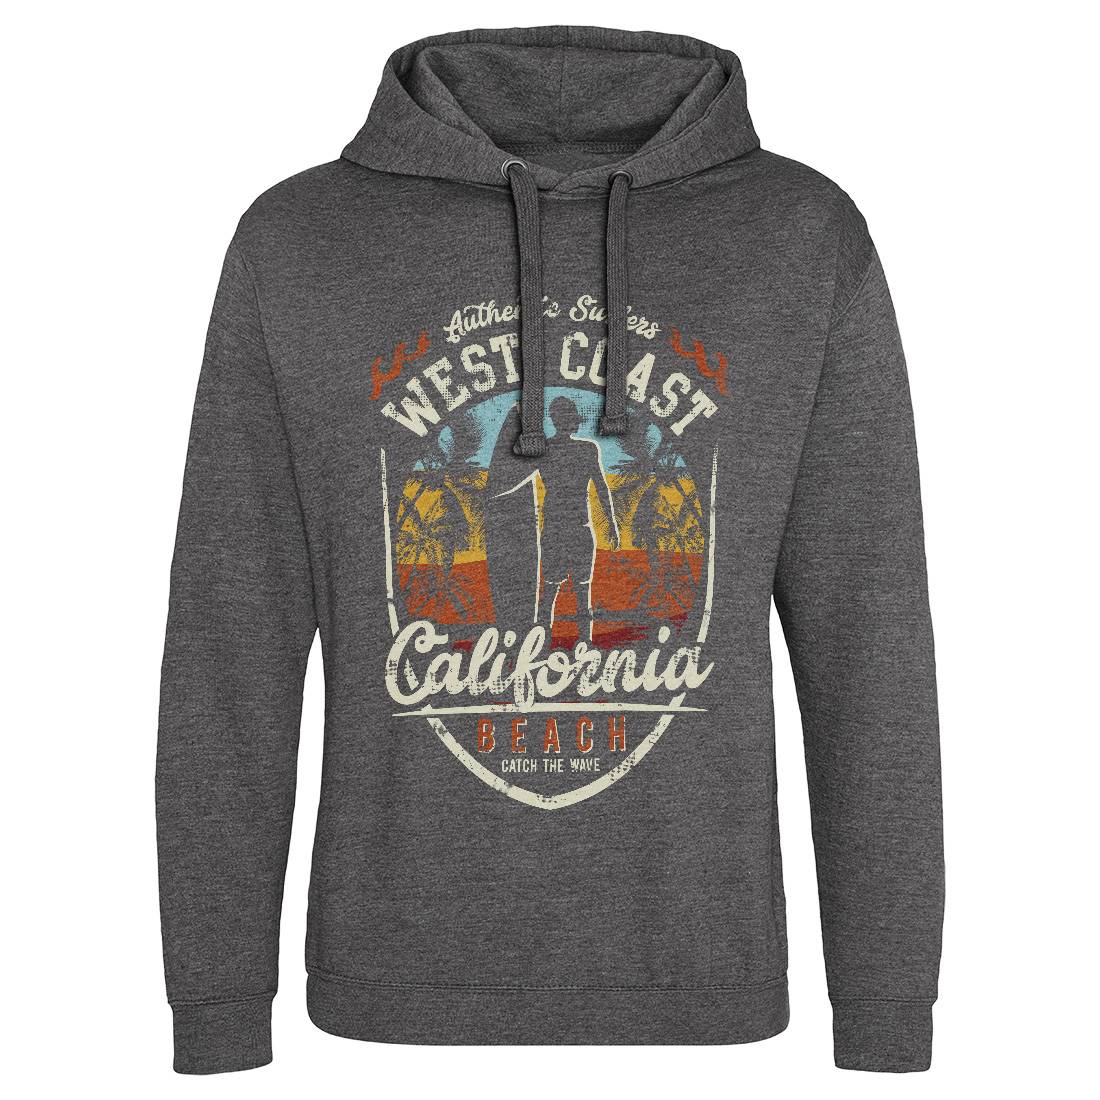 West Coast California Beach Mens Hoodie Without Pocket Holiday D095